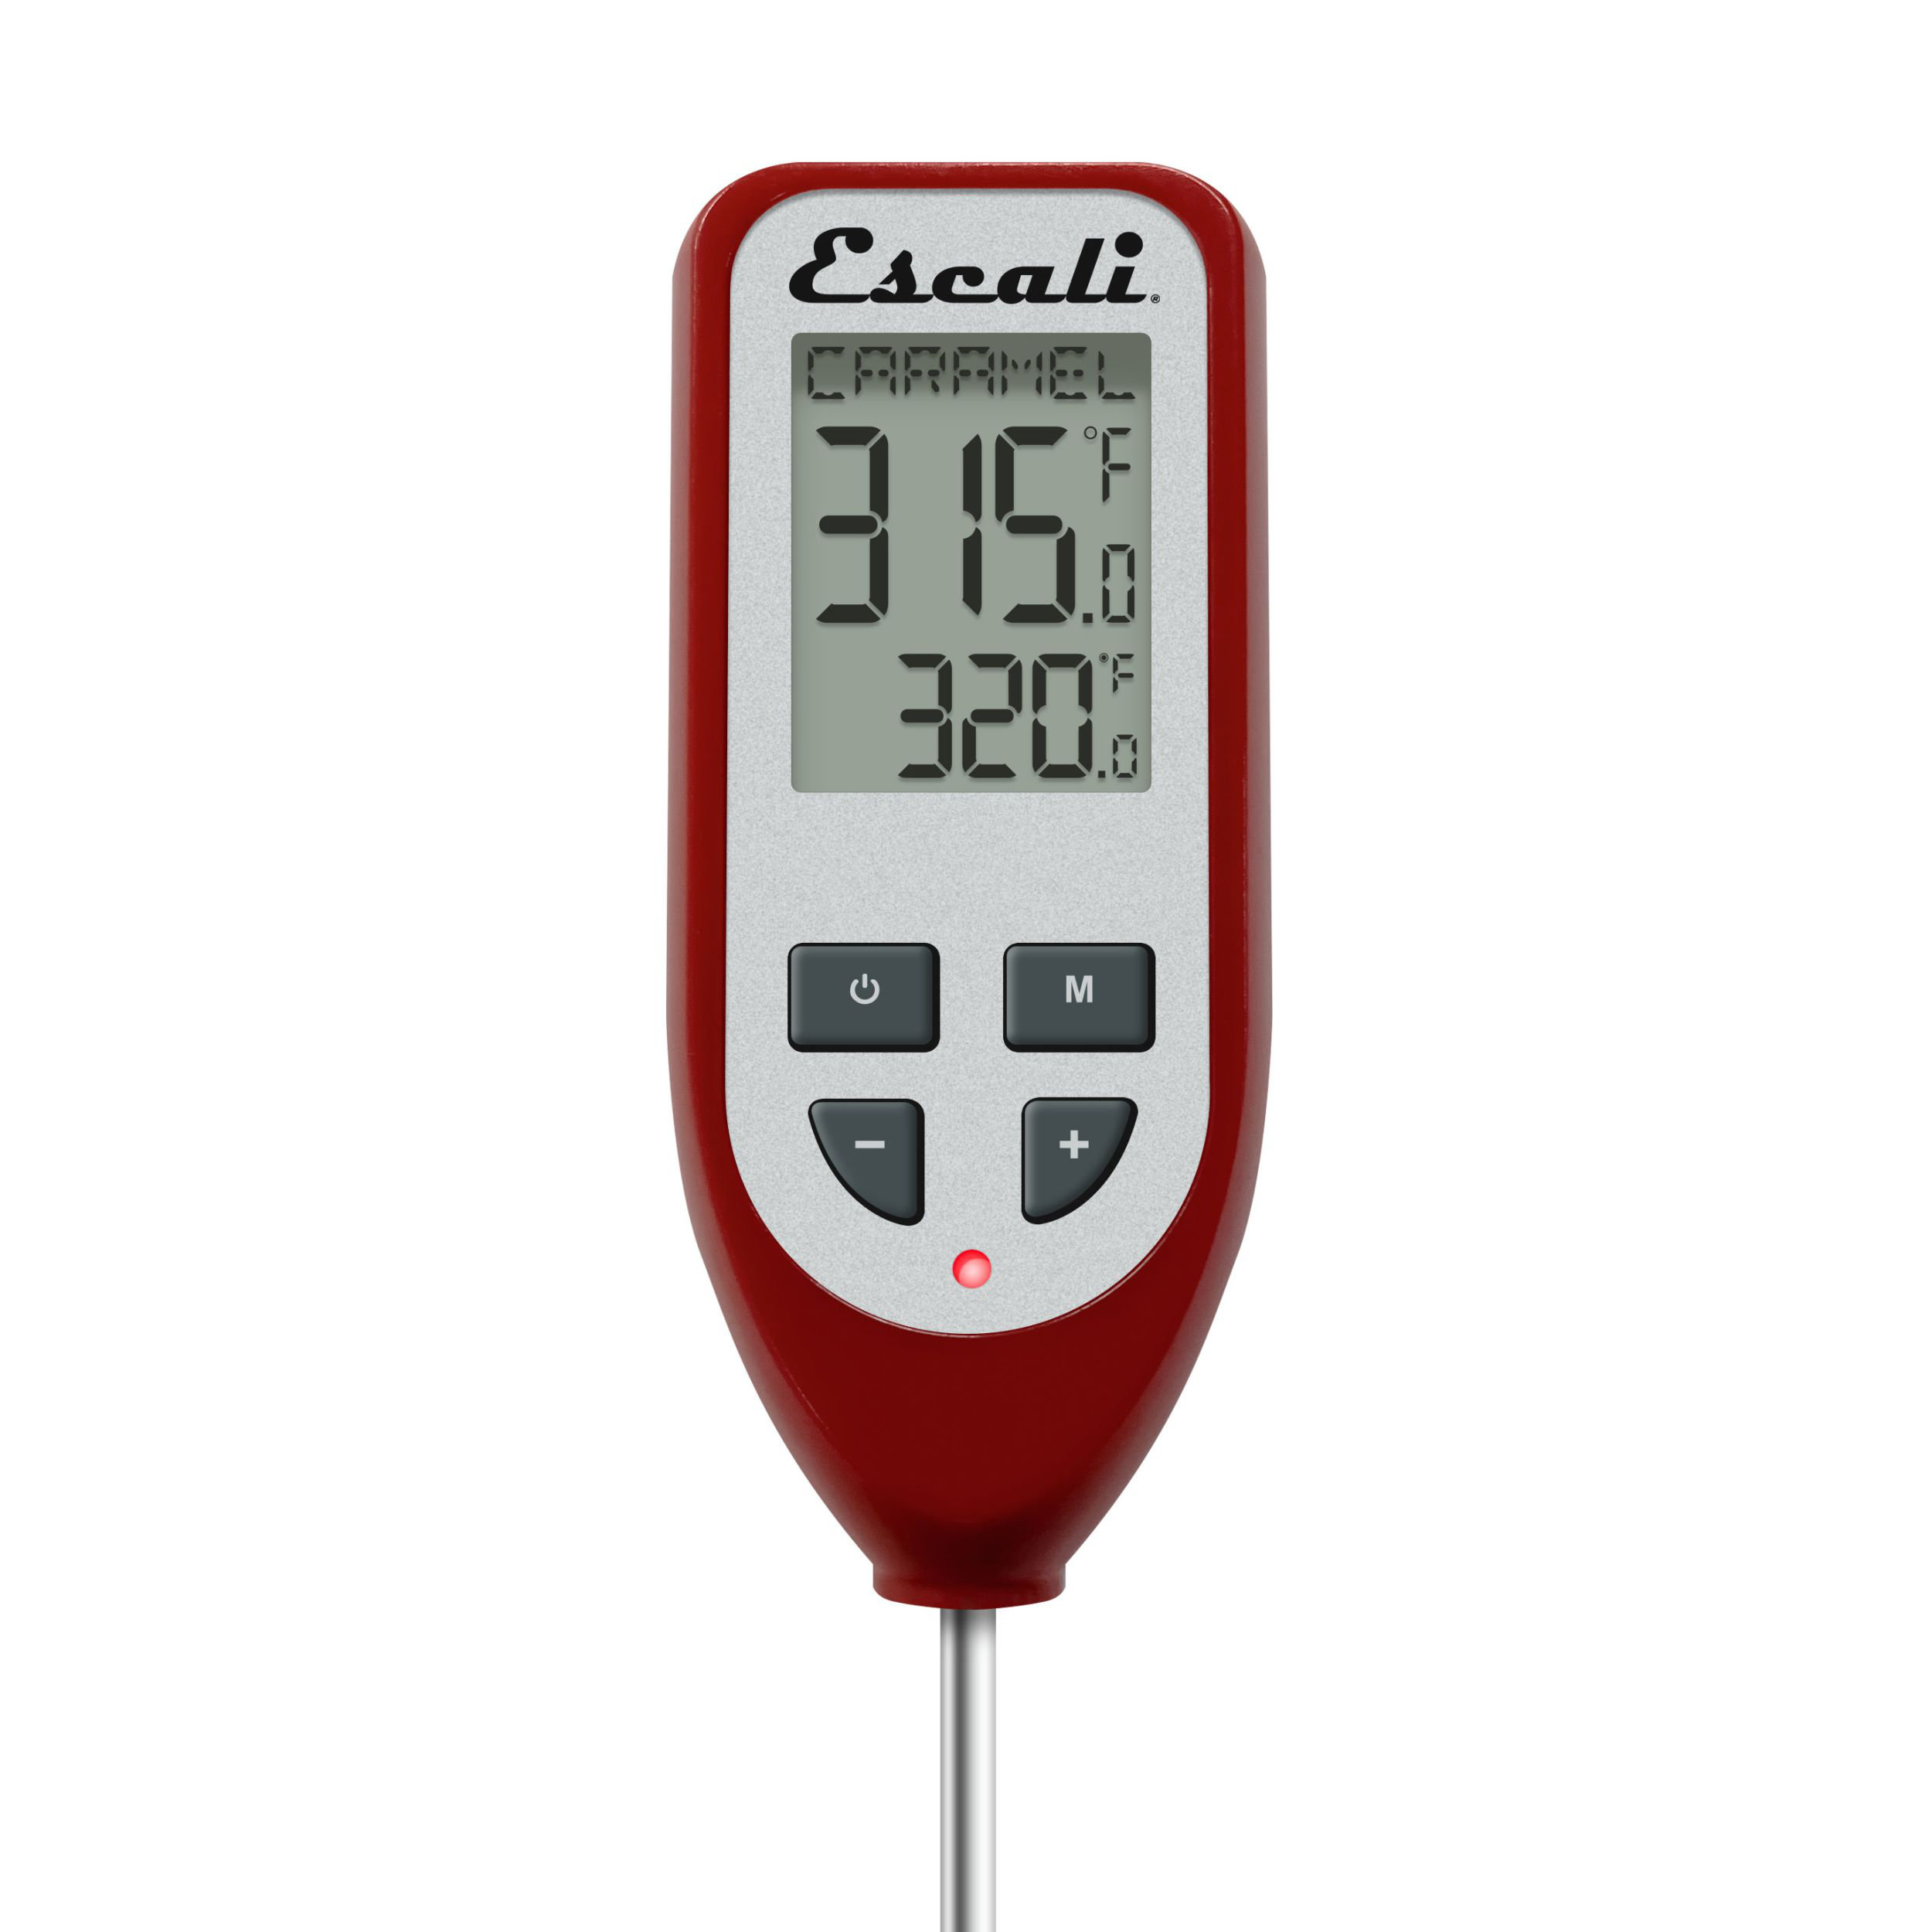 Taylor Digital Candy/deep Fry Thermometer : Target